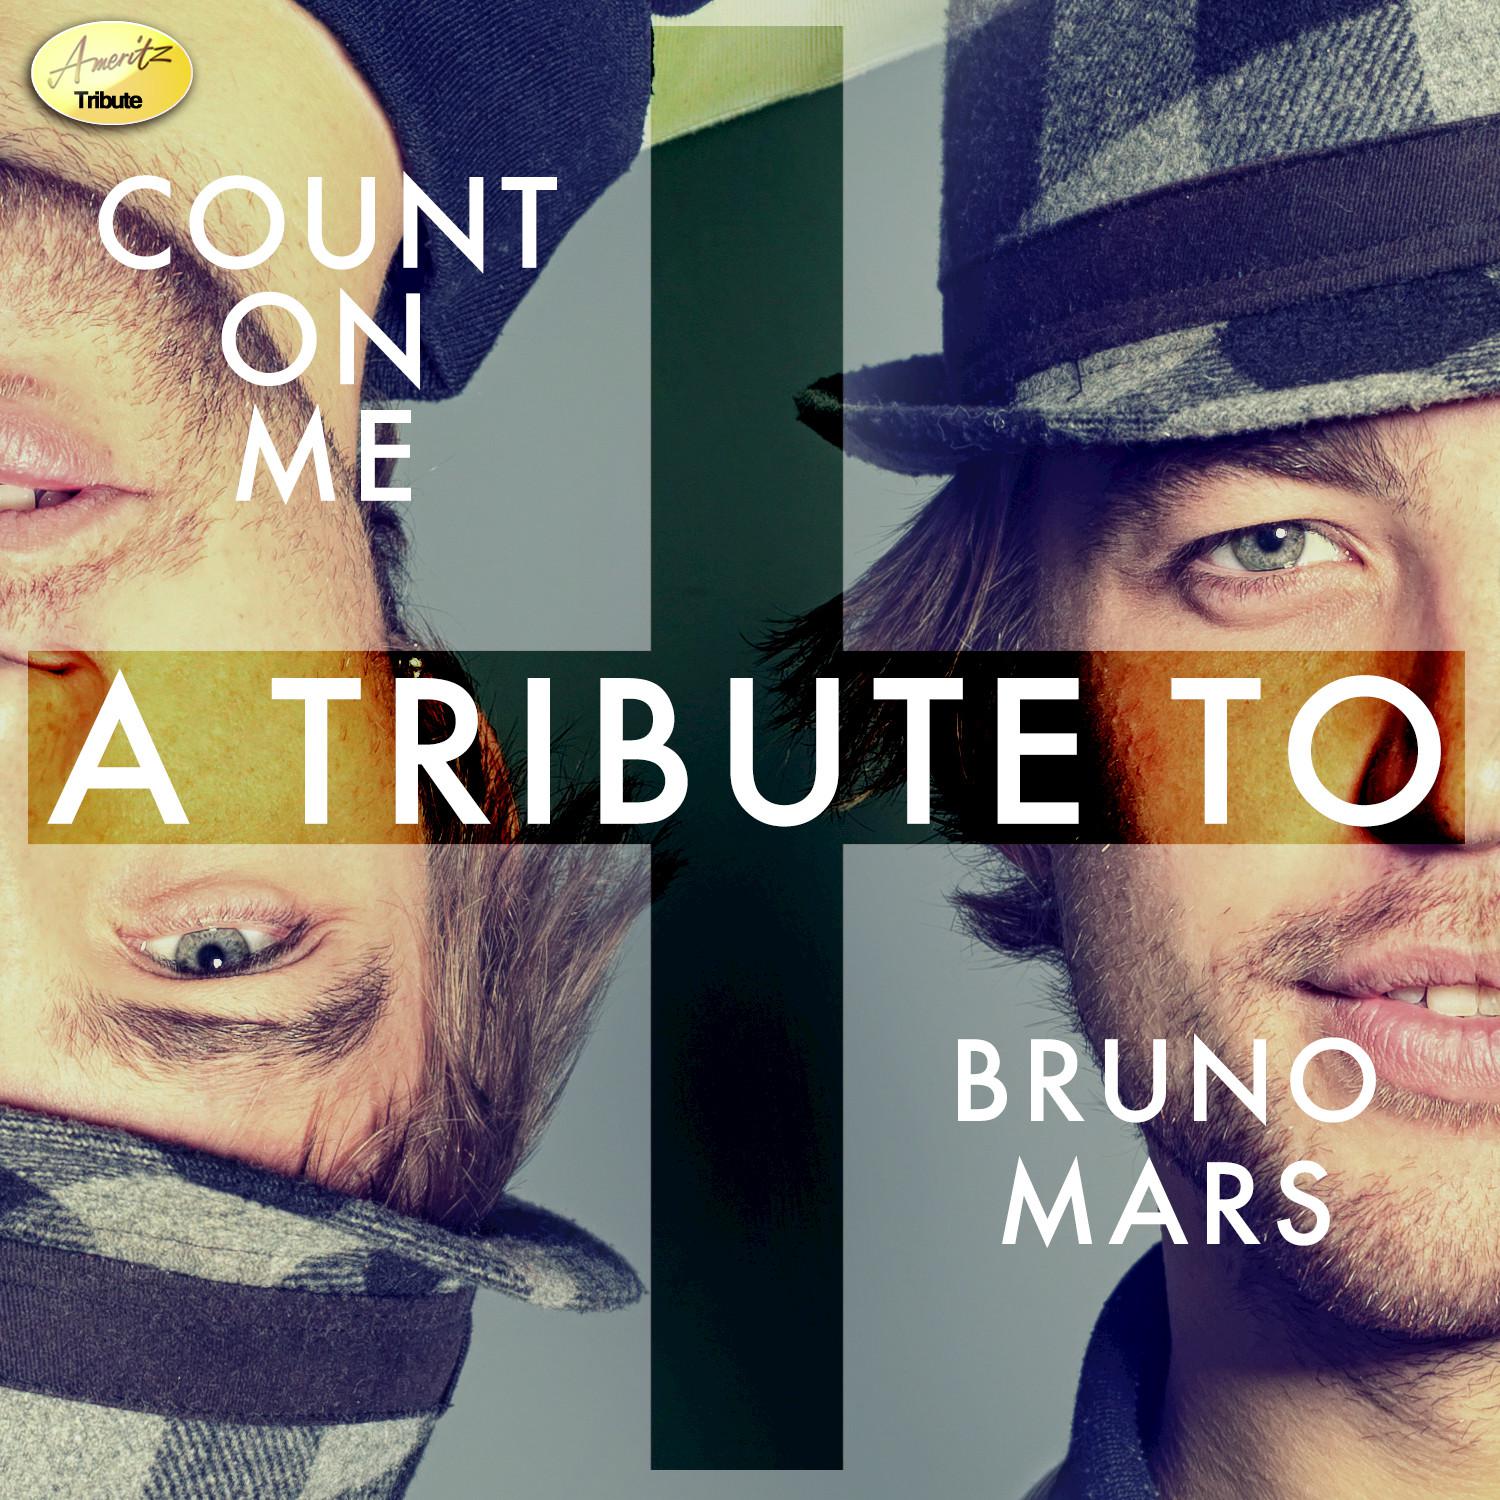 Count On Me - A Tribute to Bruno Mars